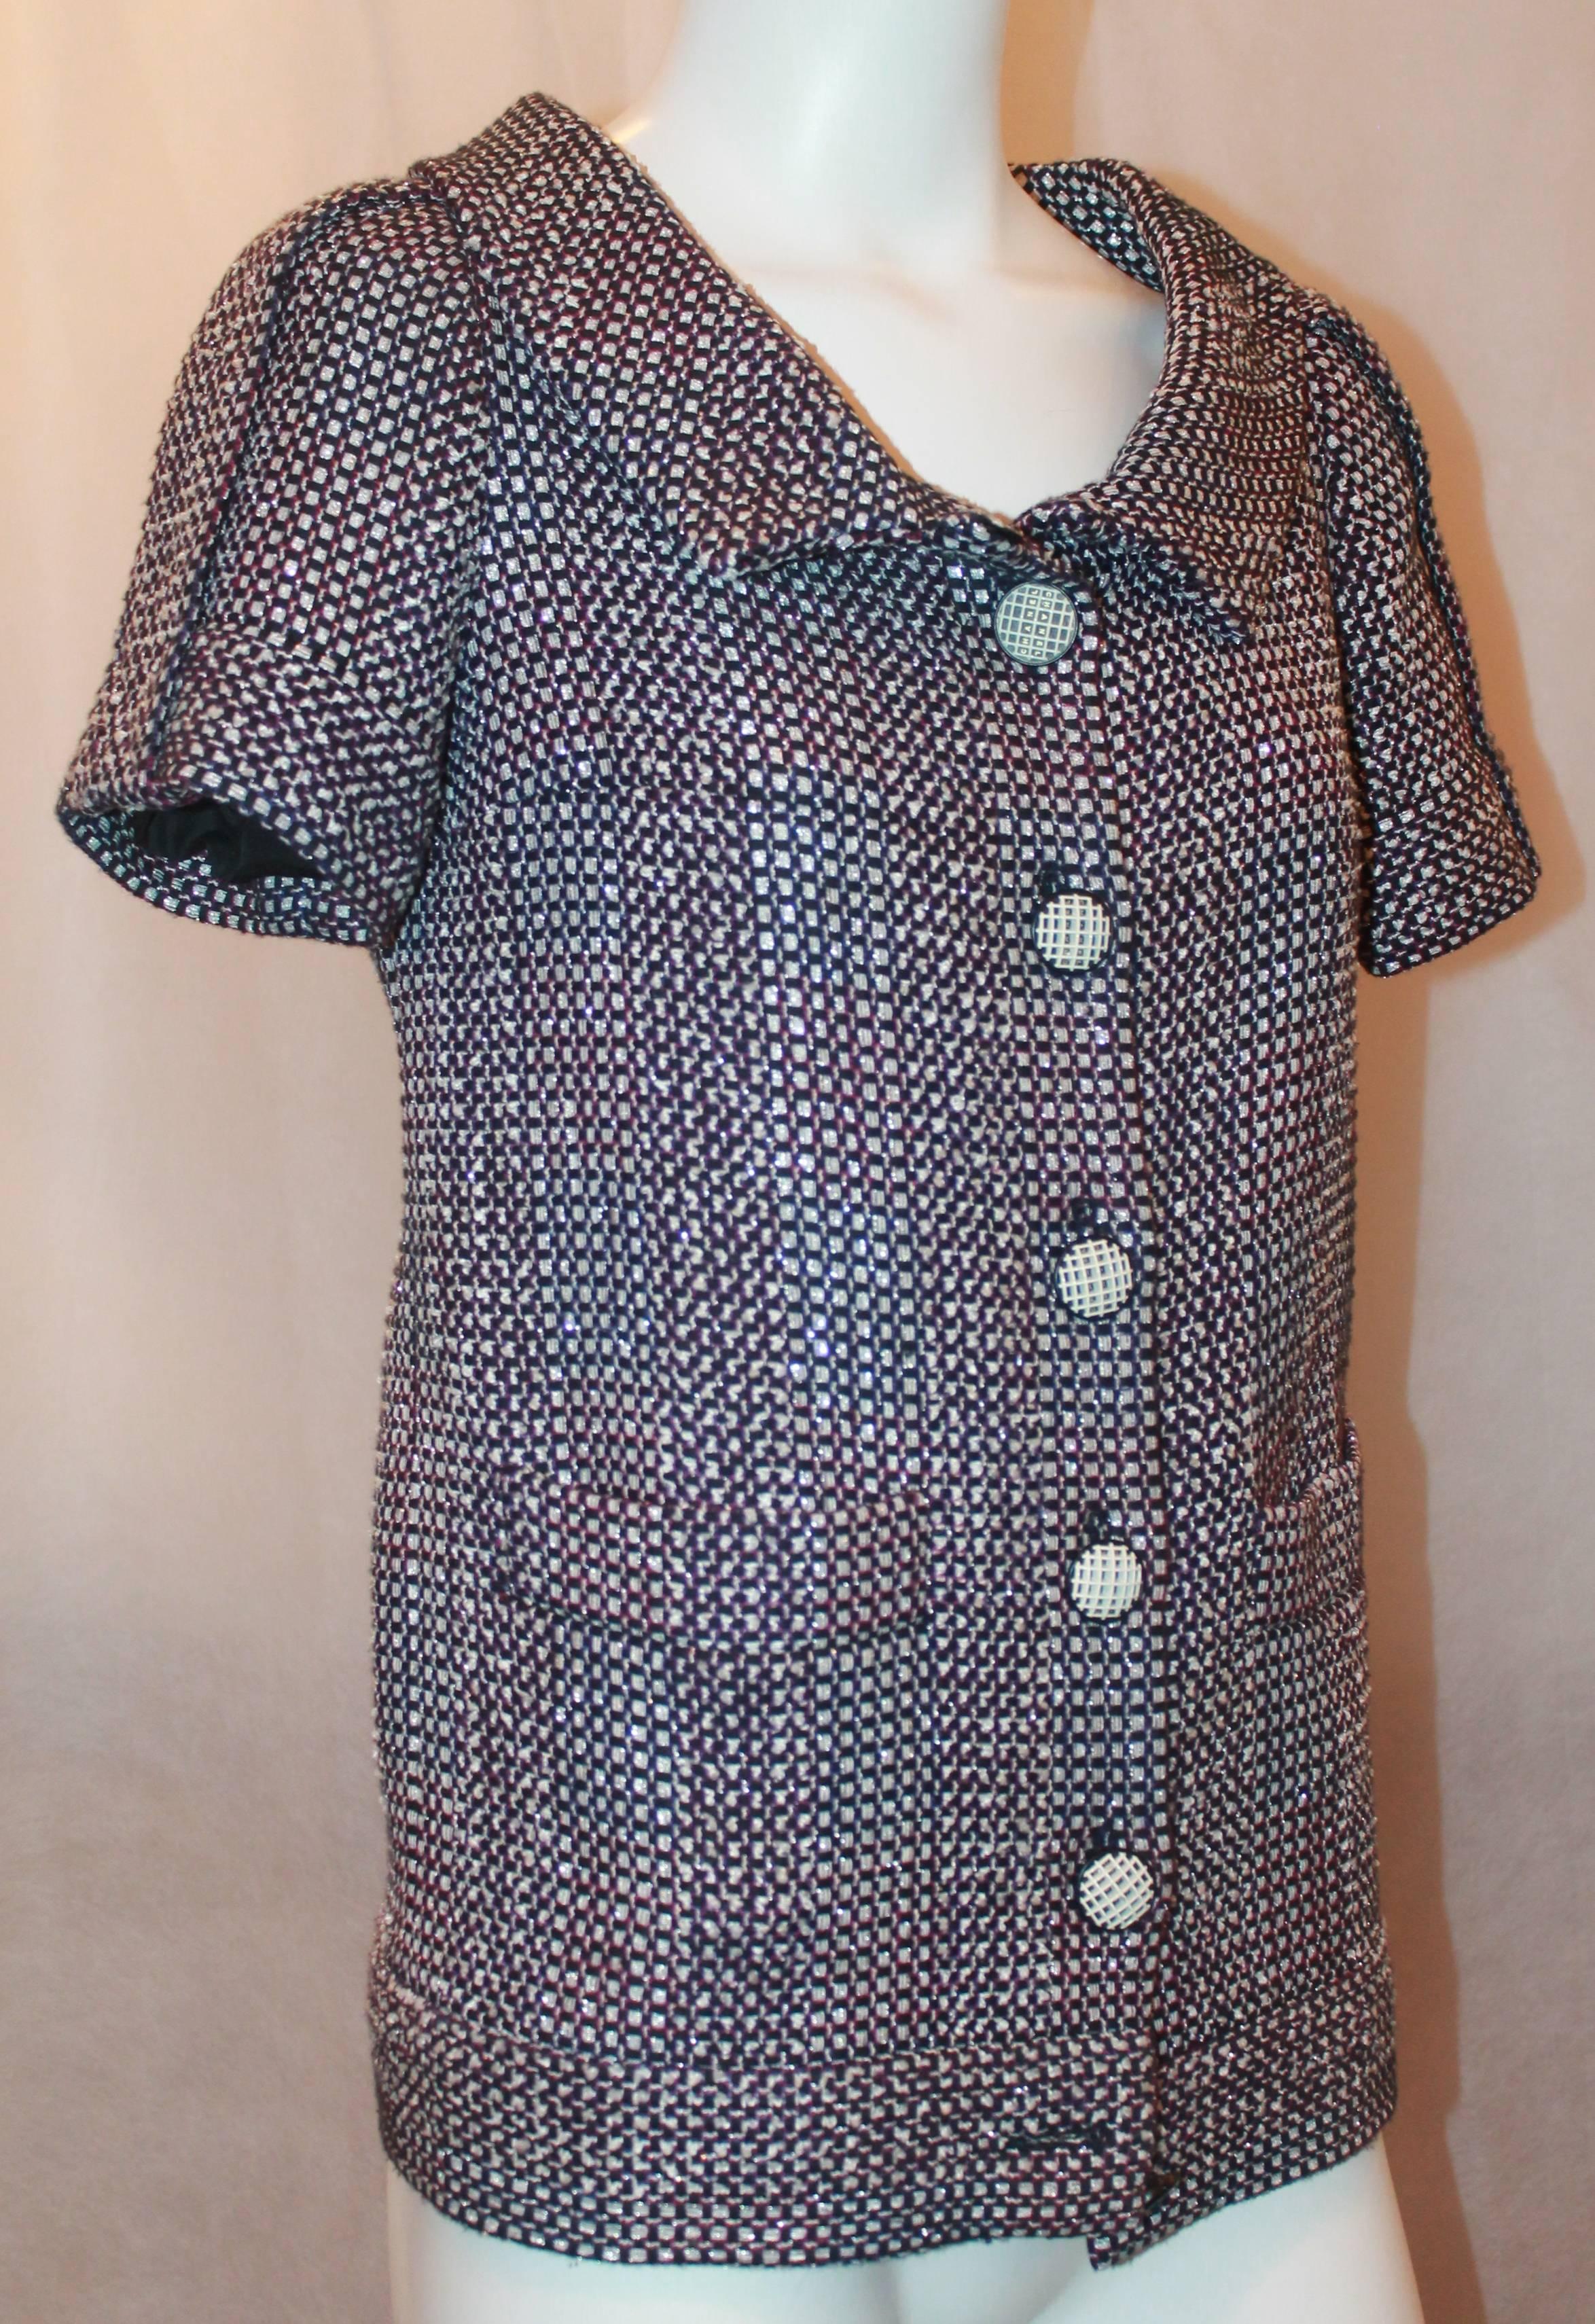 Chanel Navy, White, Pink, & Purple Tweed Short Sleeve Jacket - 34.  This lovely Chanel Jacket is in excellent condition.  It features a collar, two front pockets, black and white buttons with Chanel inscription, and a black 